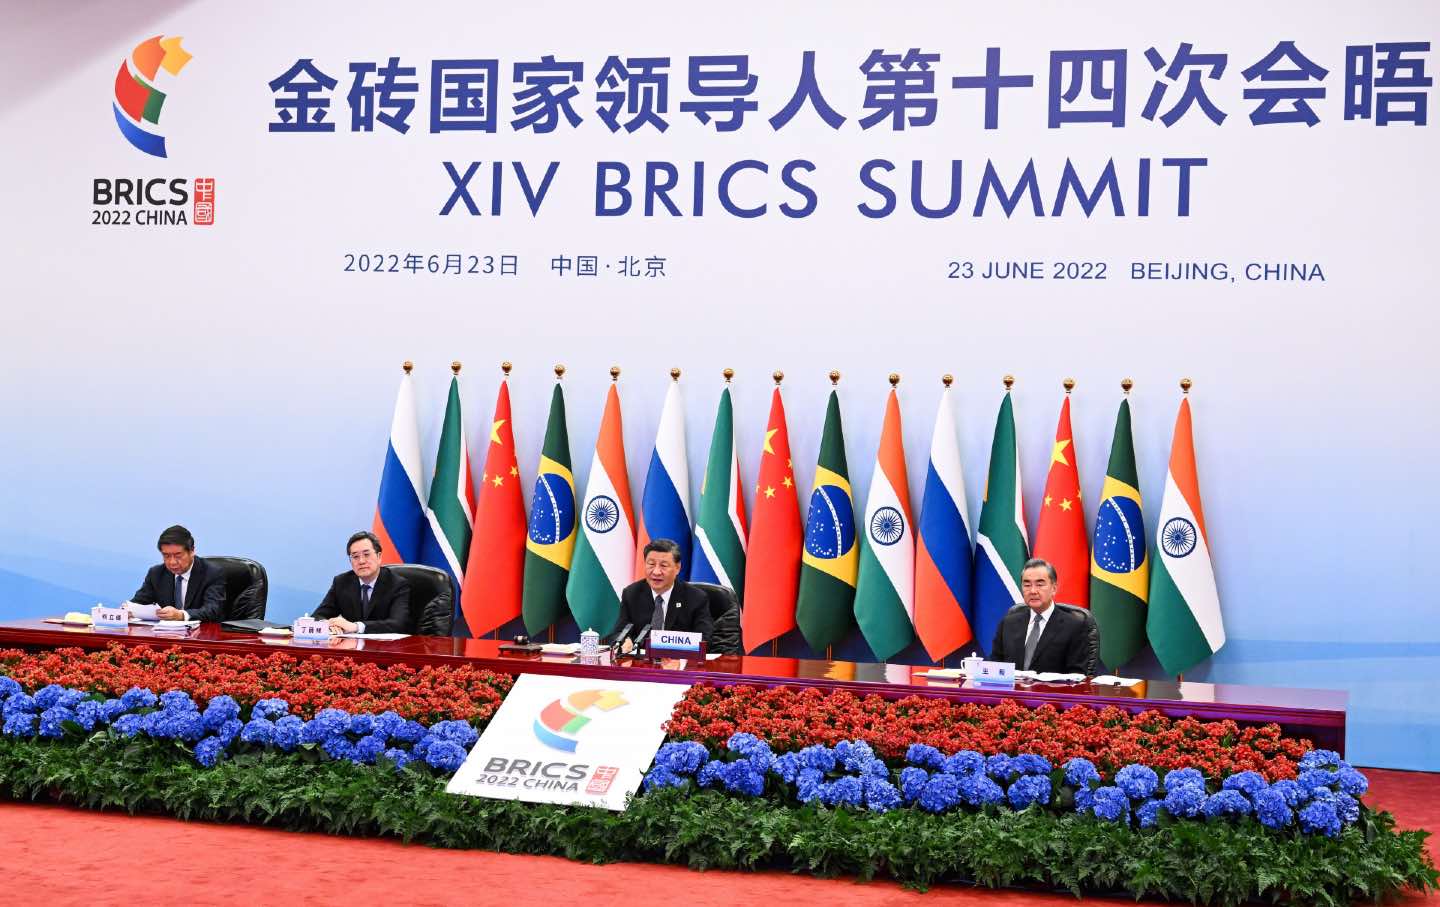 About, 2022 Summit